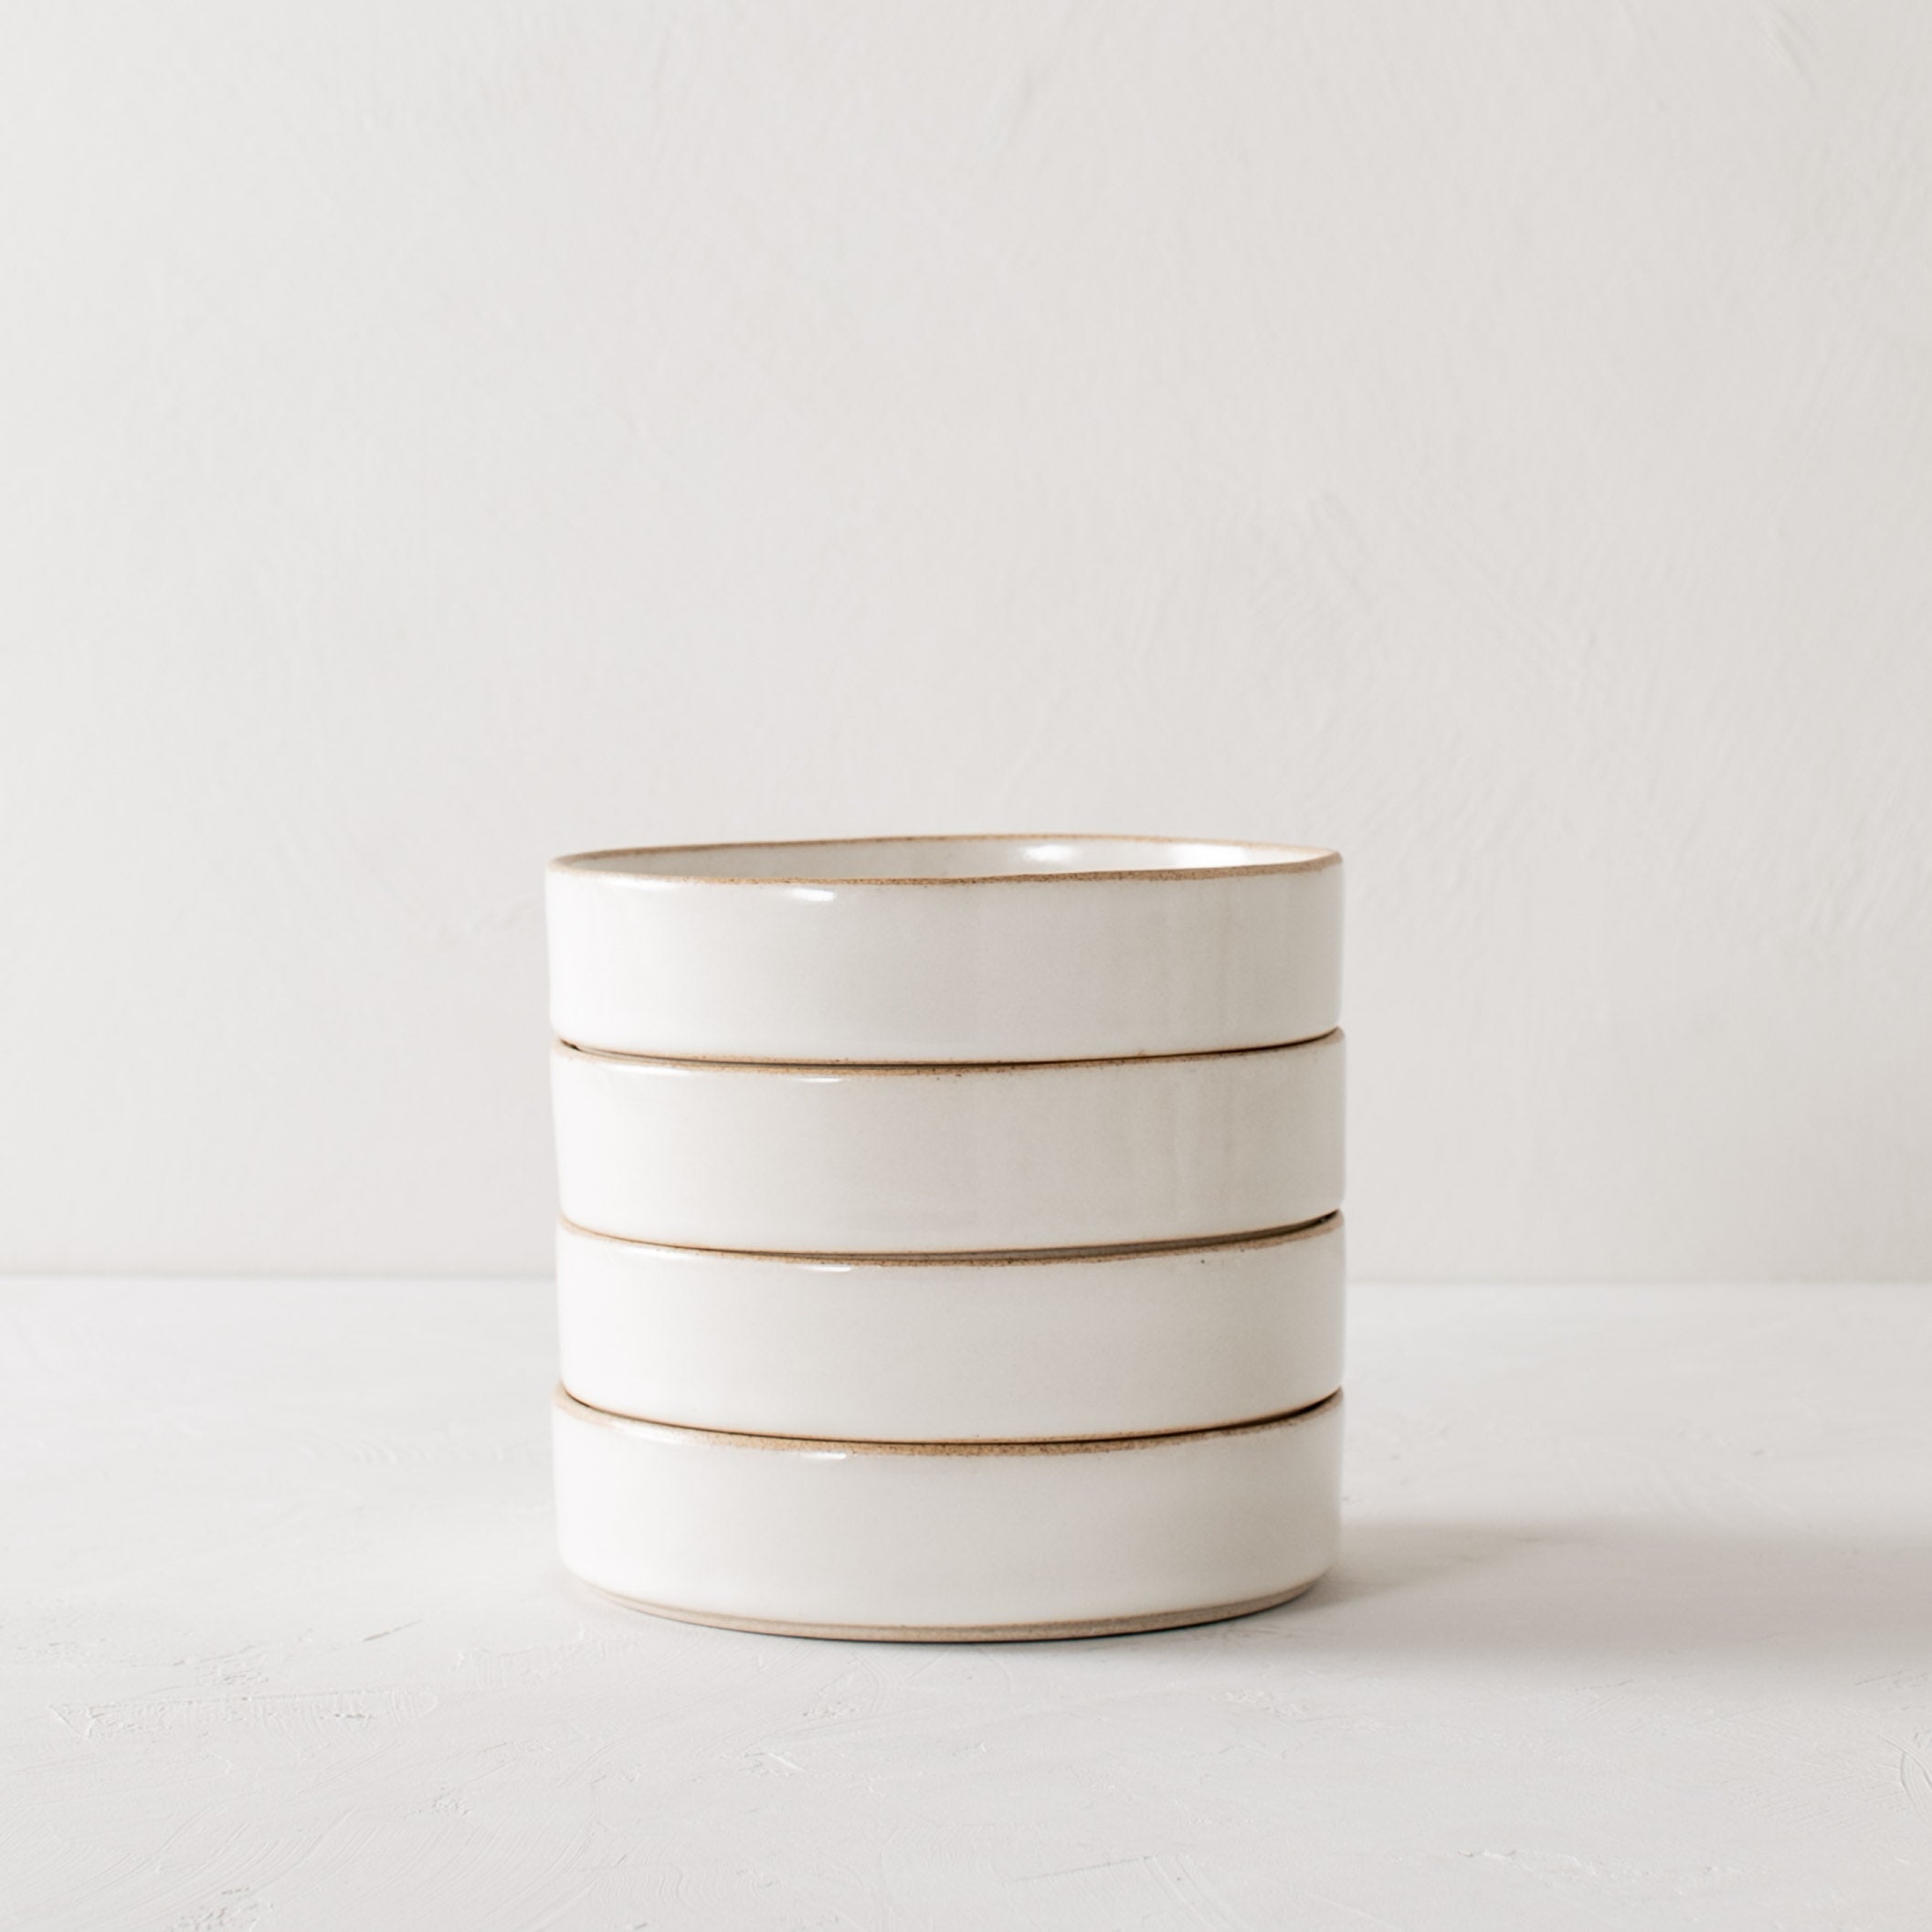 Stack of four minimal white ceramic minimal salad dishes. Handmade salad dishes designed and sold by Convivial Production, Kansas City ceramics.